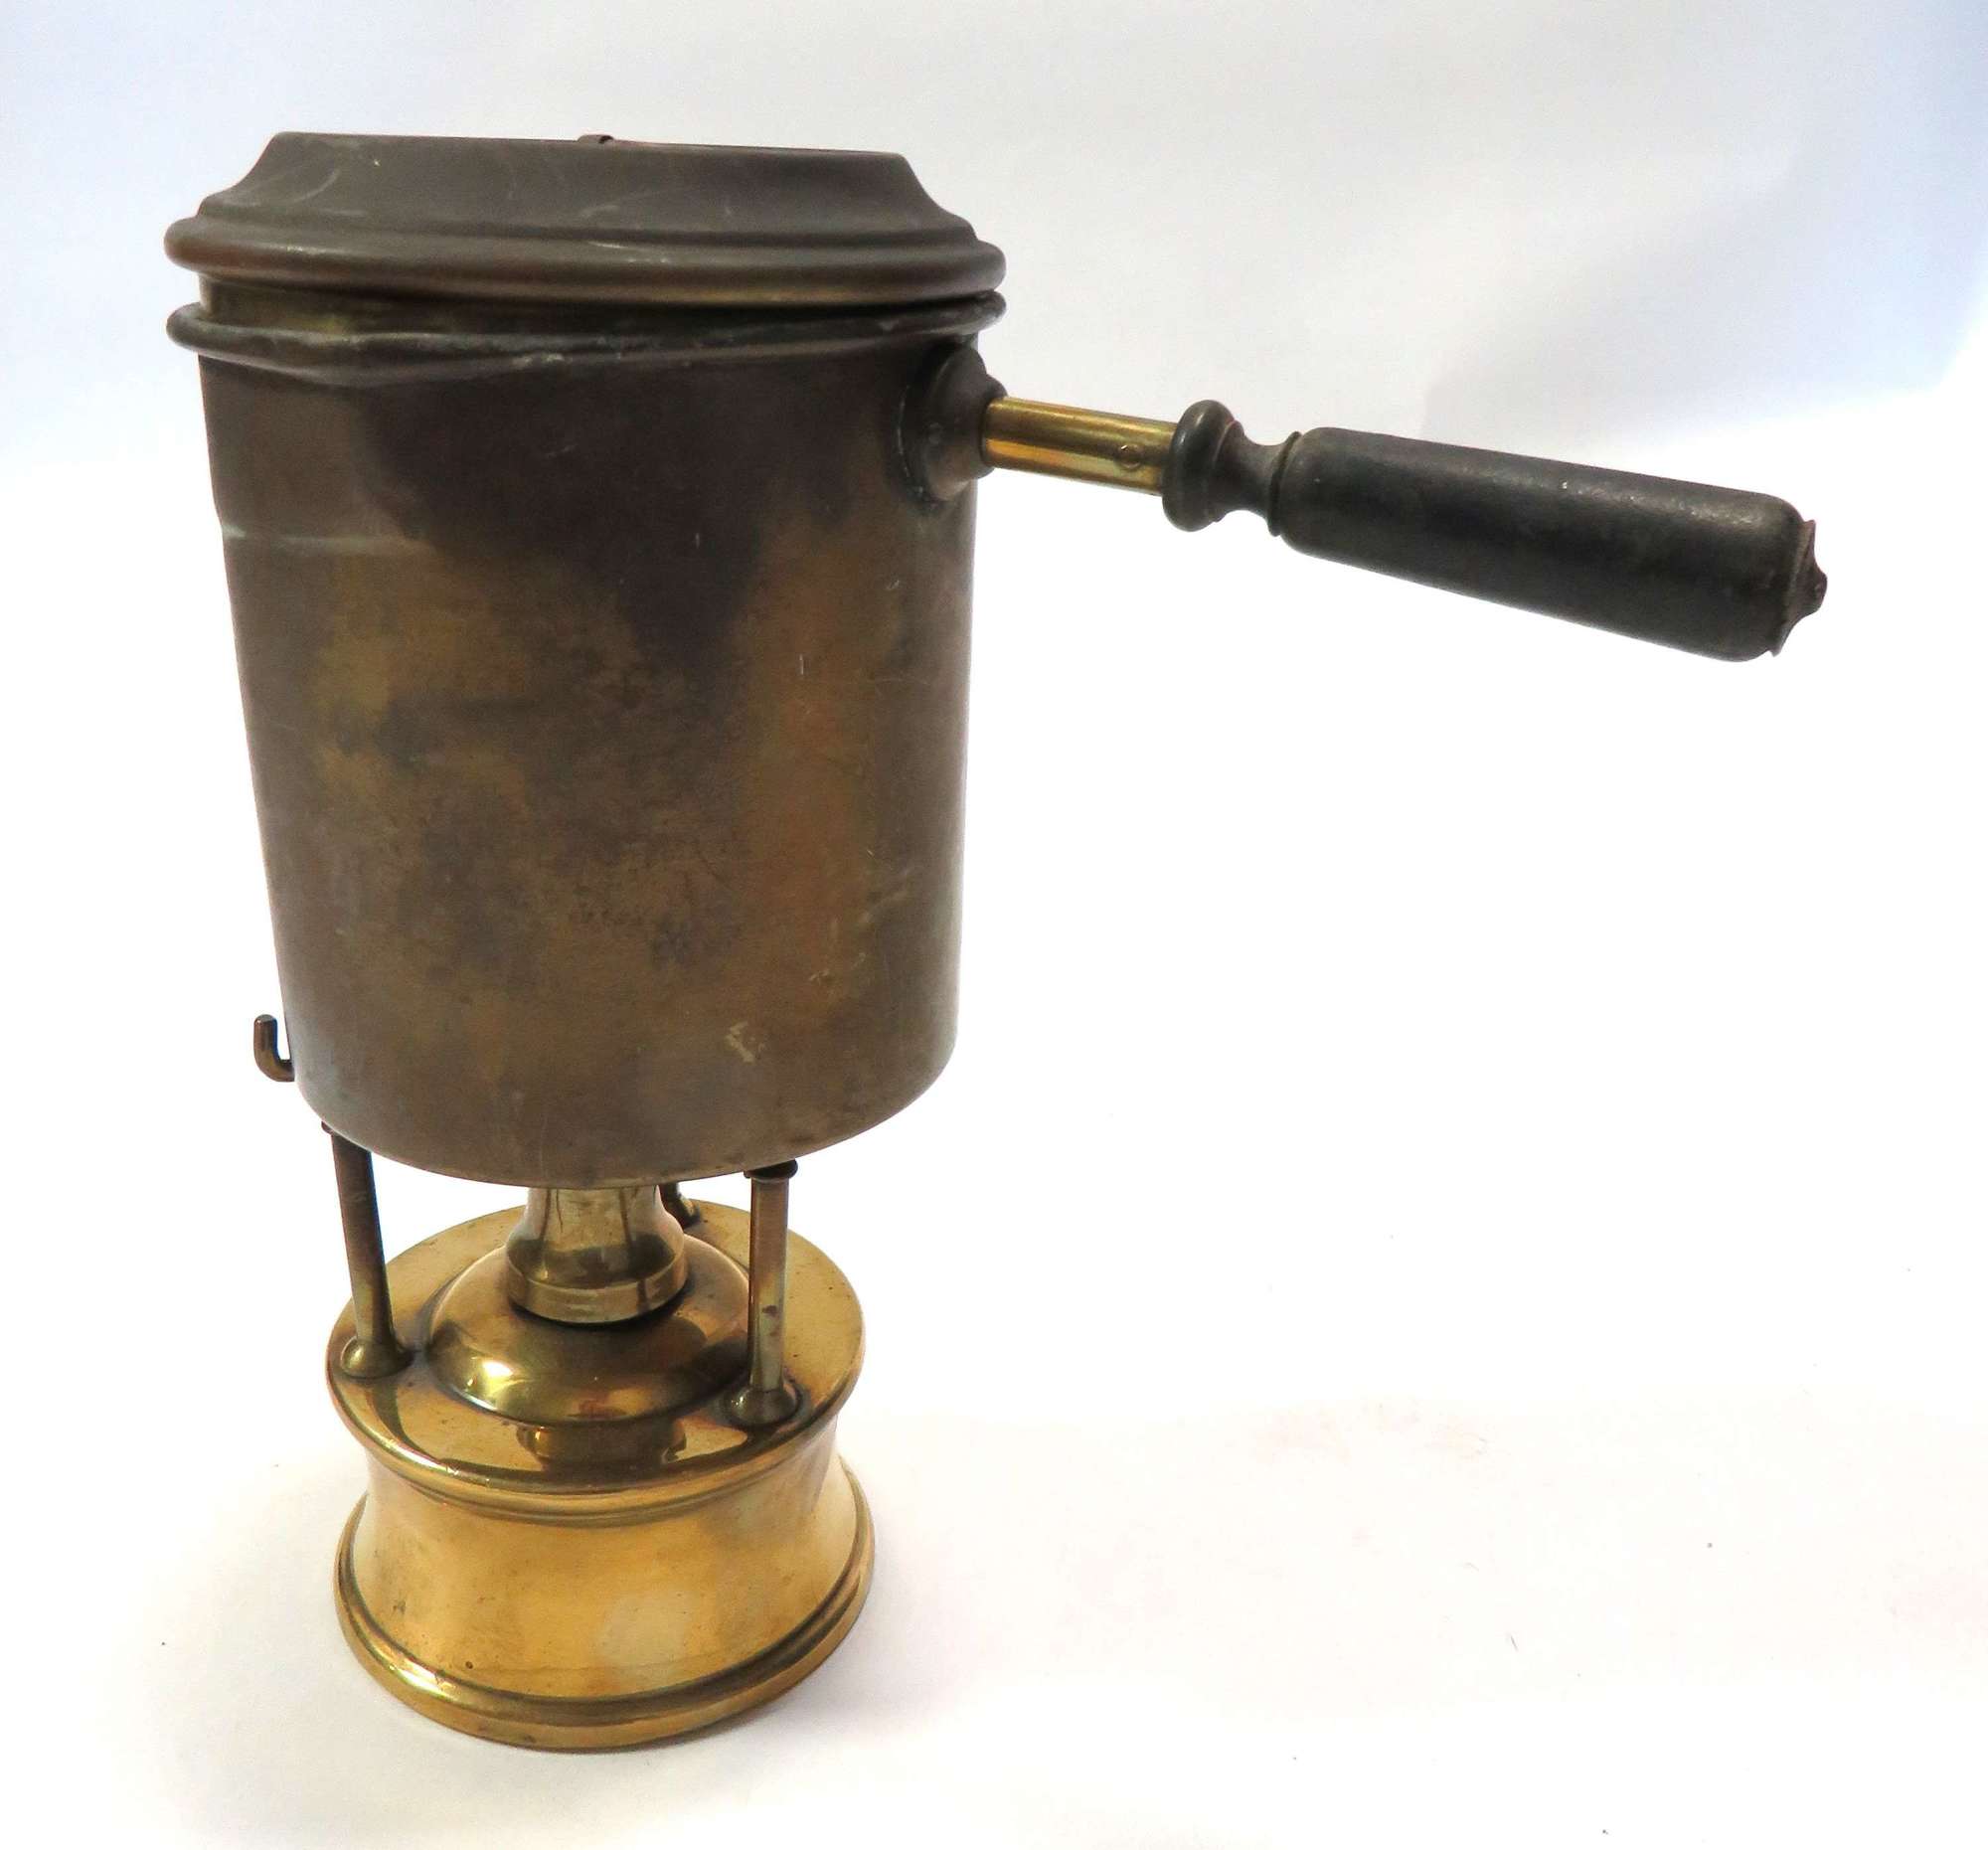 Boer War / WW1 Officers Trench Campaign Small Stove and Pot